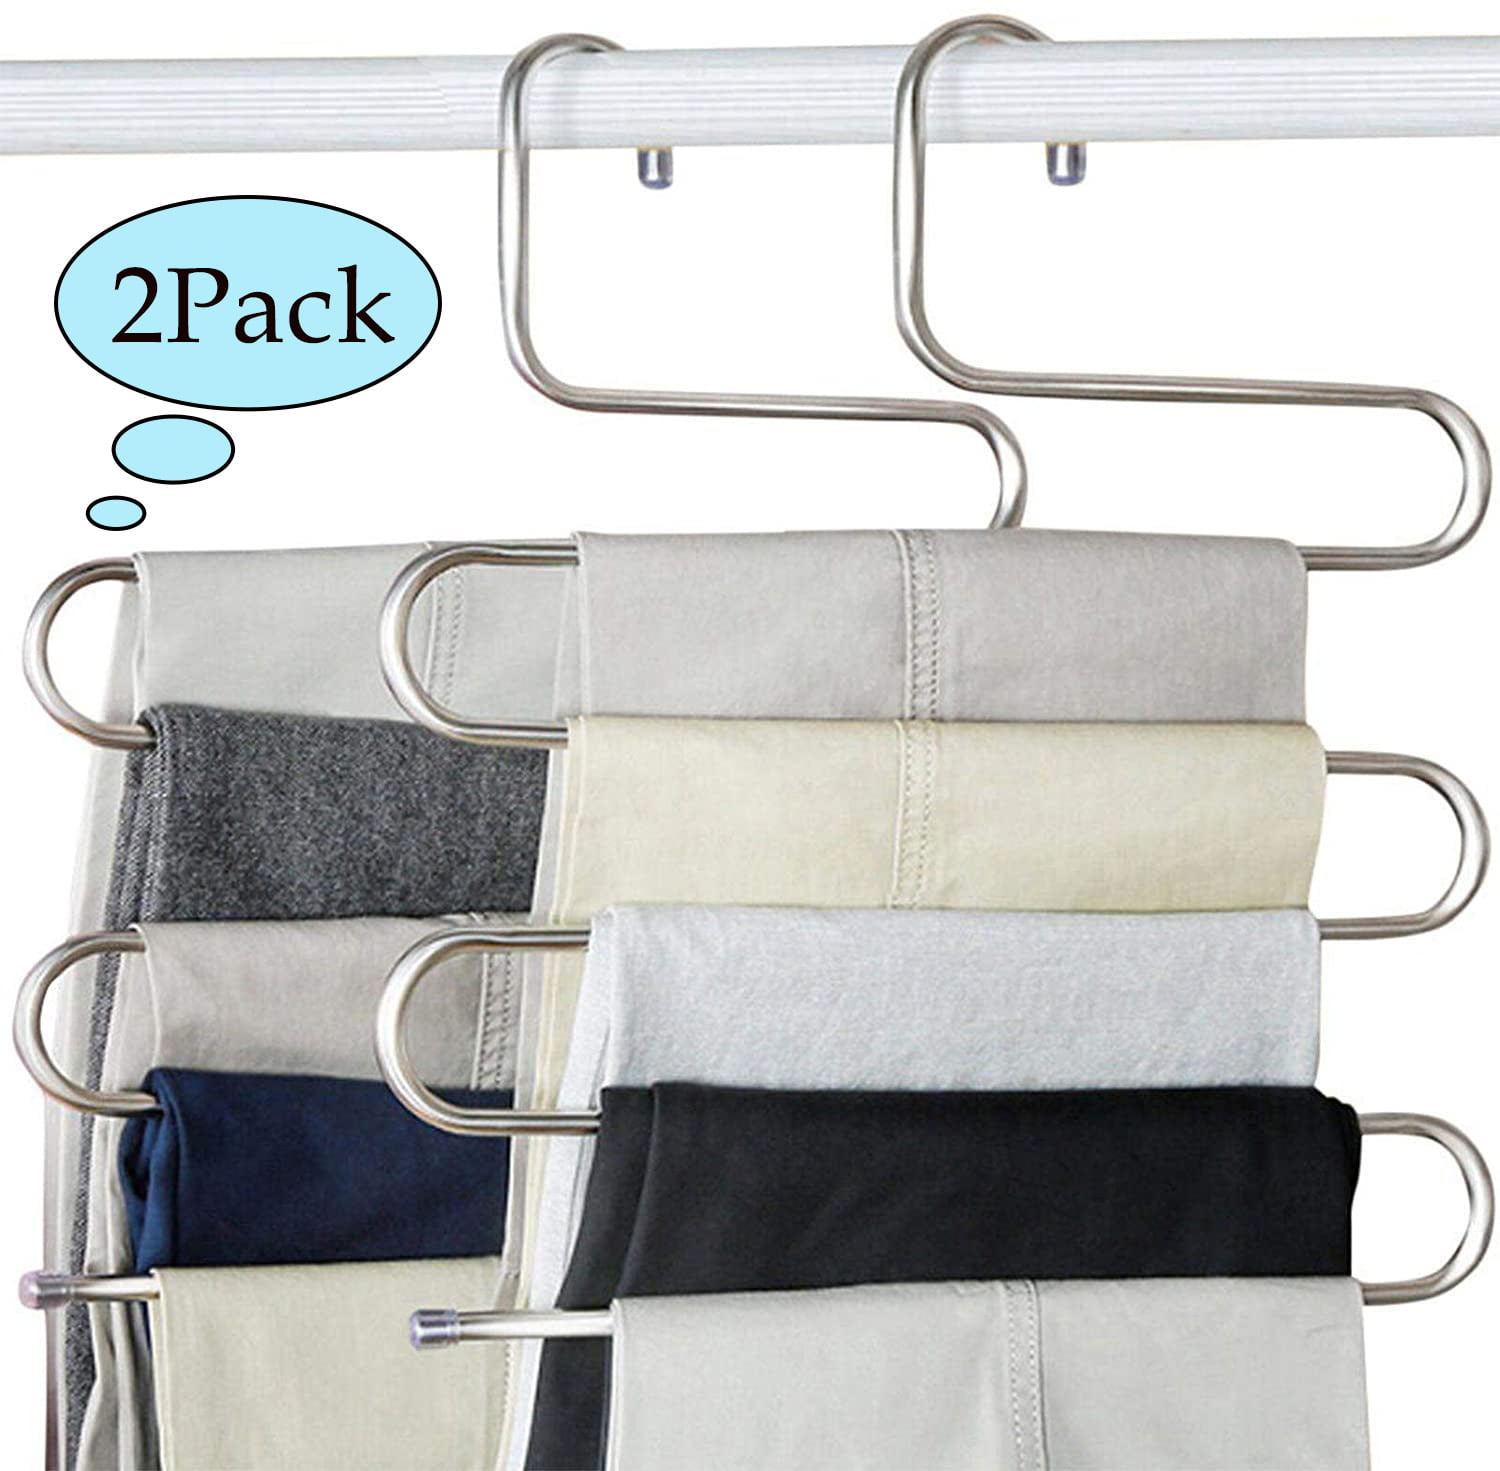 Stainless Steel S-Shape Trousers Clothes Organizer Closet Space Saving for Pants Jeans Scarf Silver Slack Flurries Folding Pants Hangers